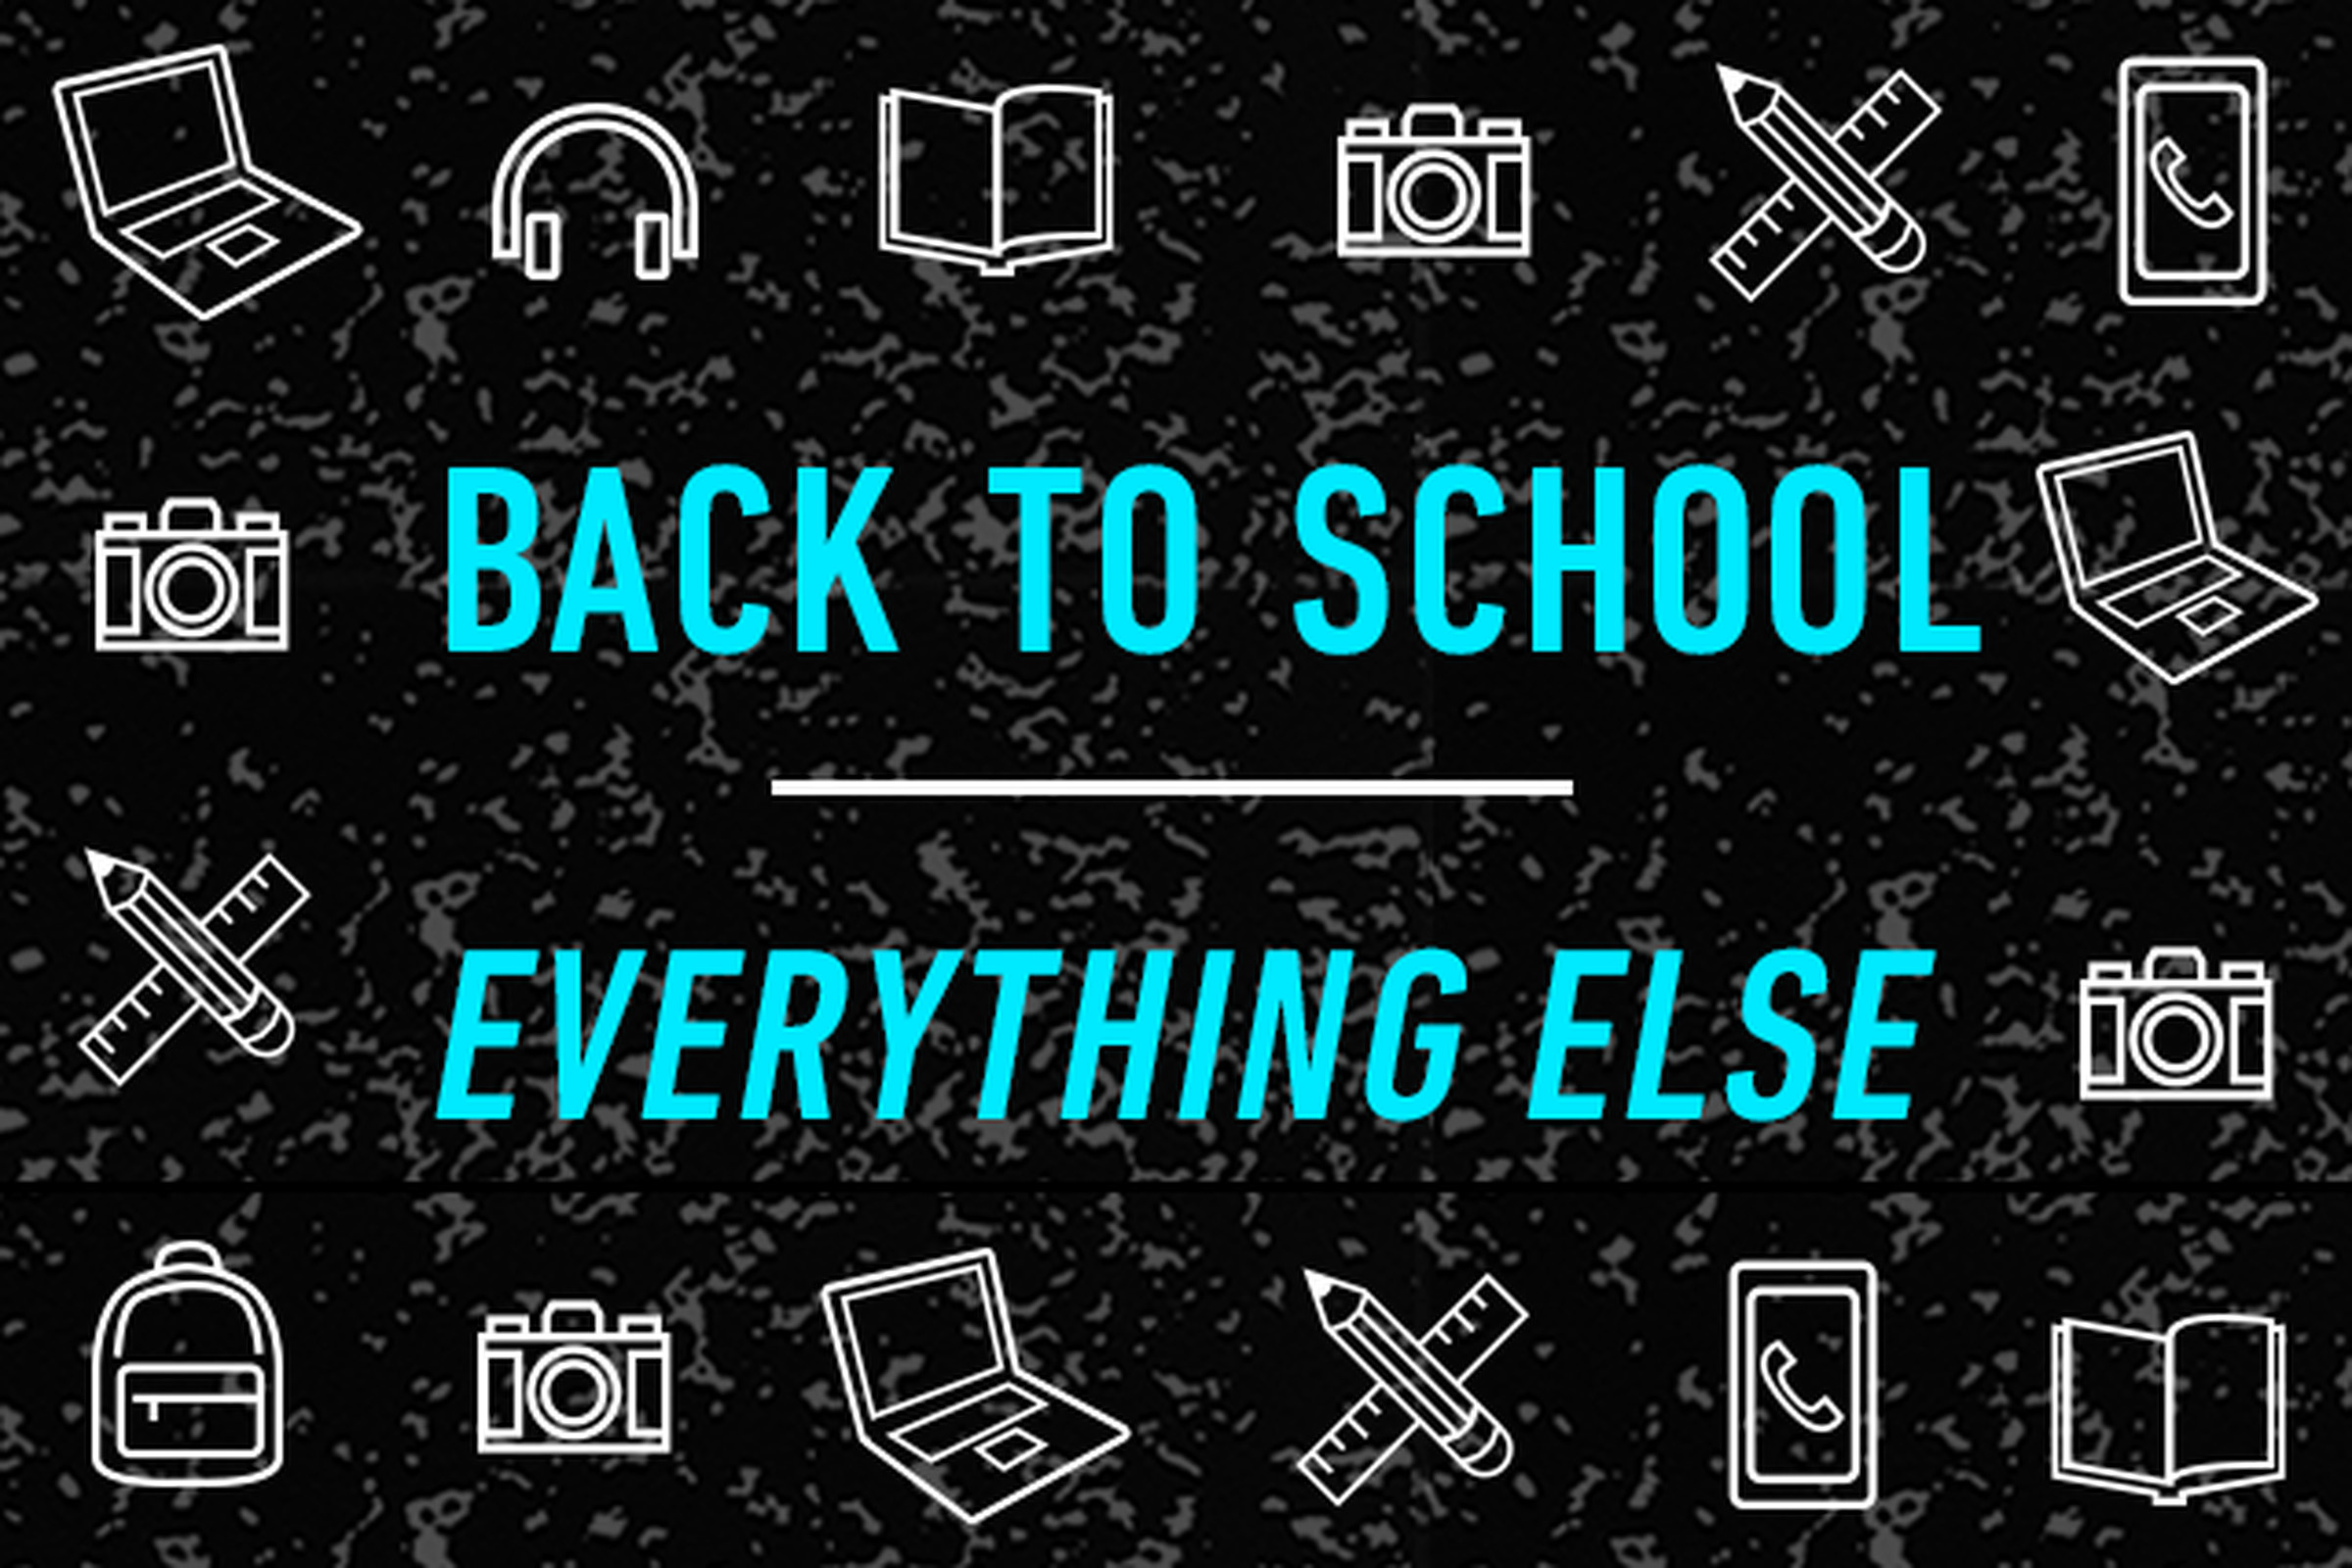 Back to School: Everything else